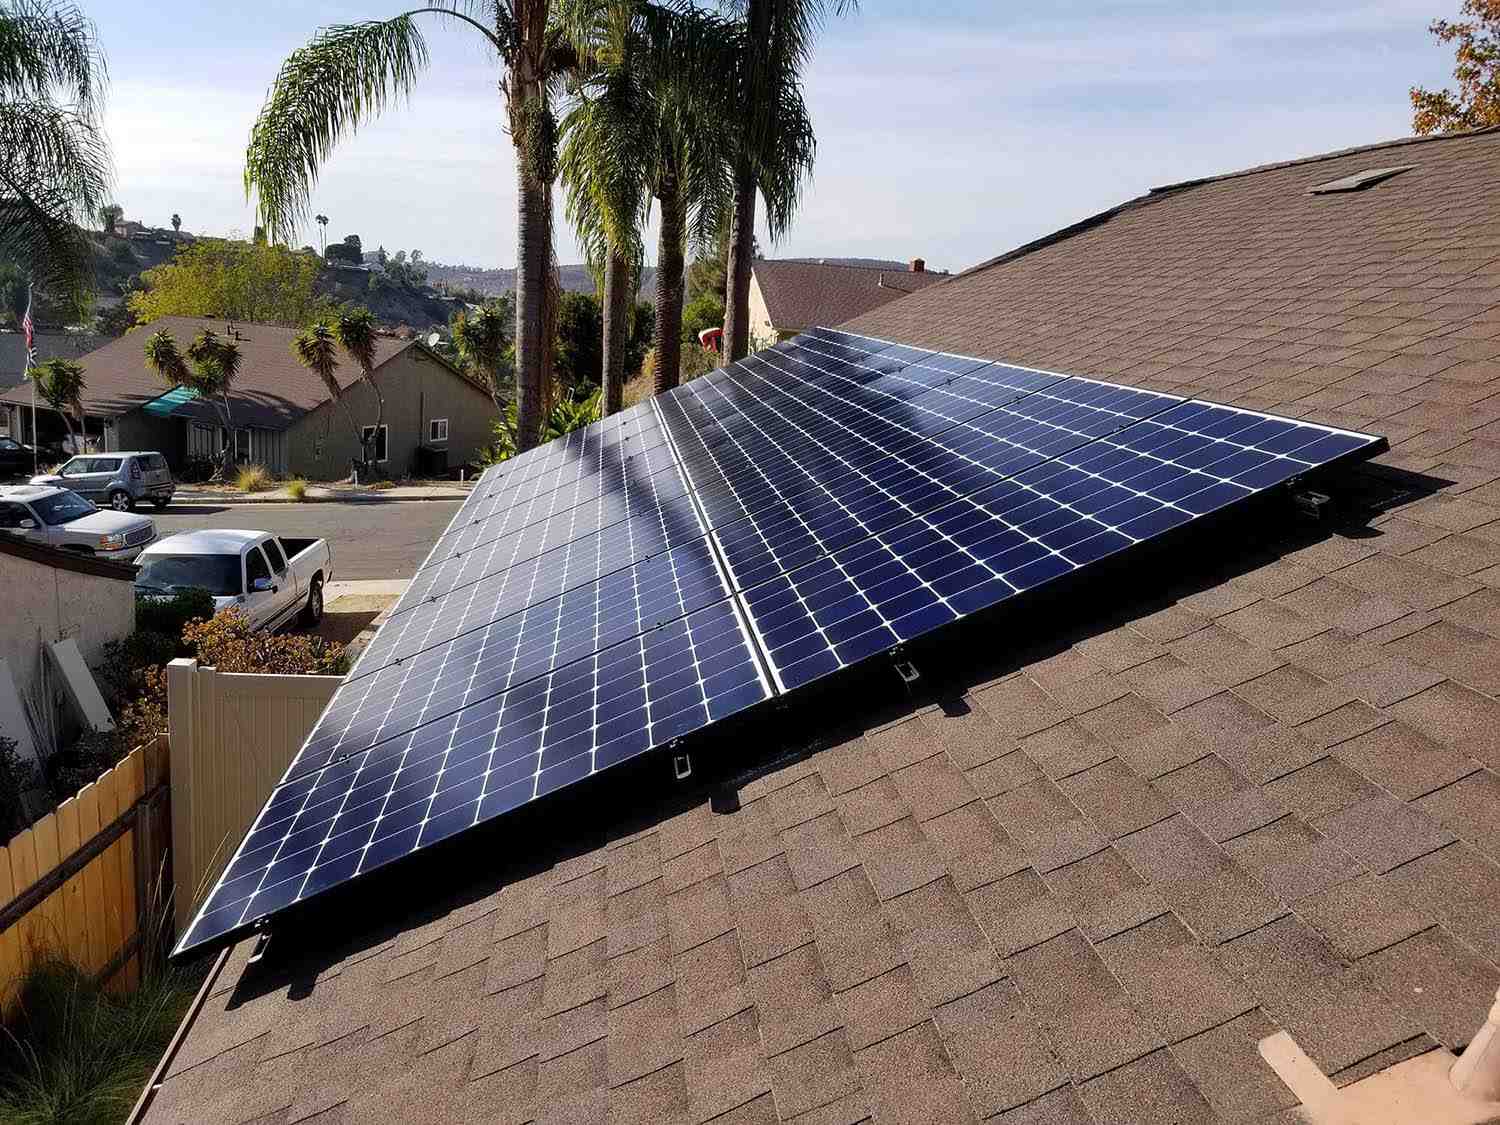 Should I invest in solar now?